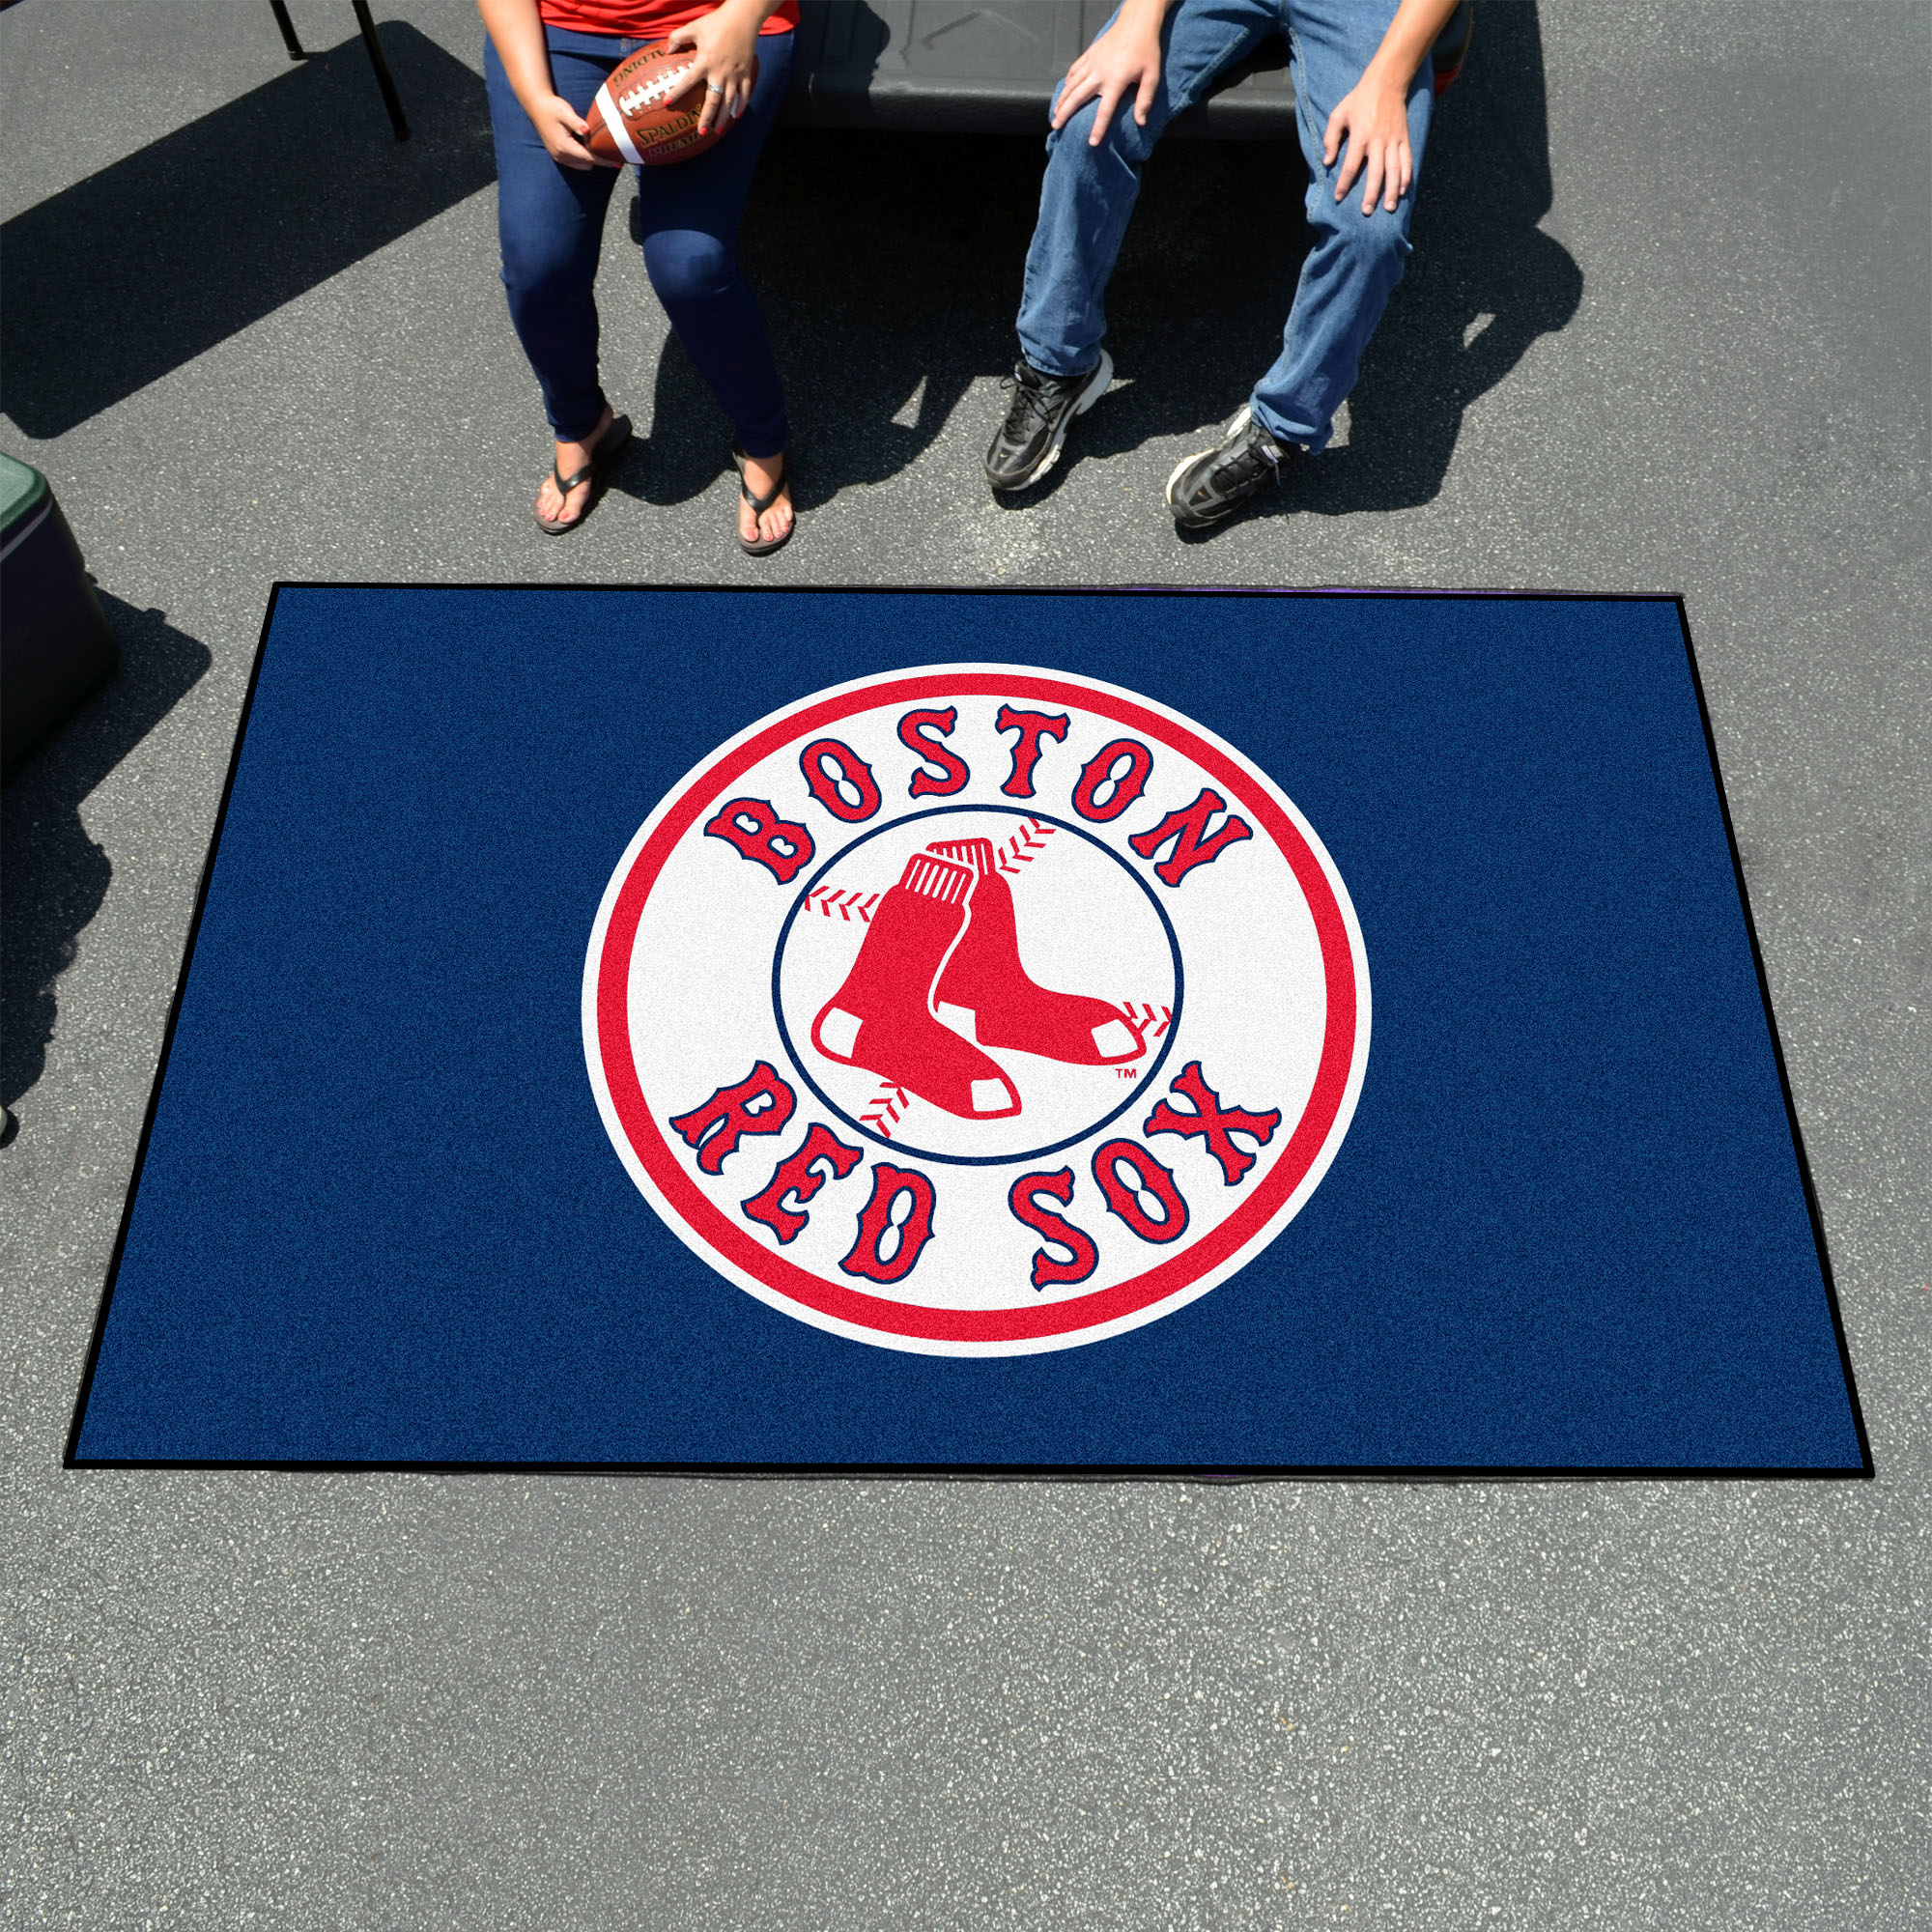 Boston Red Sox Outdoor Ulti-Mat - 60 x 96